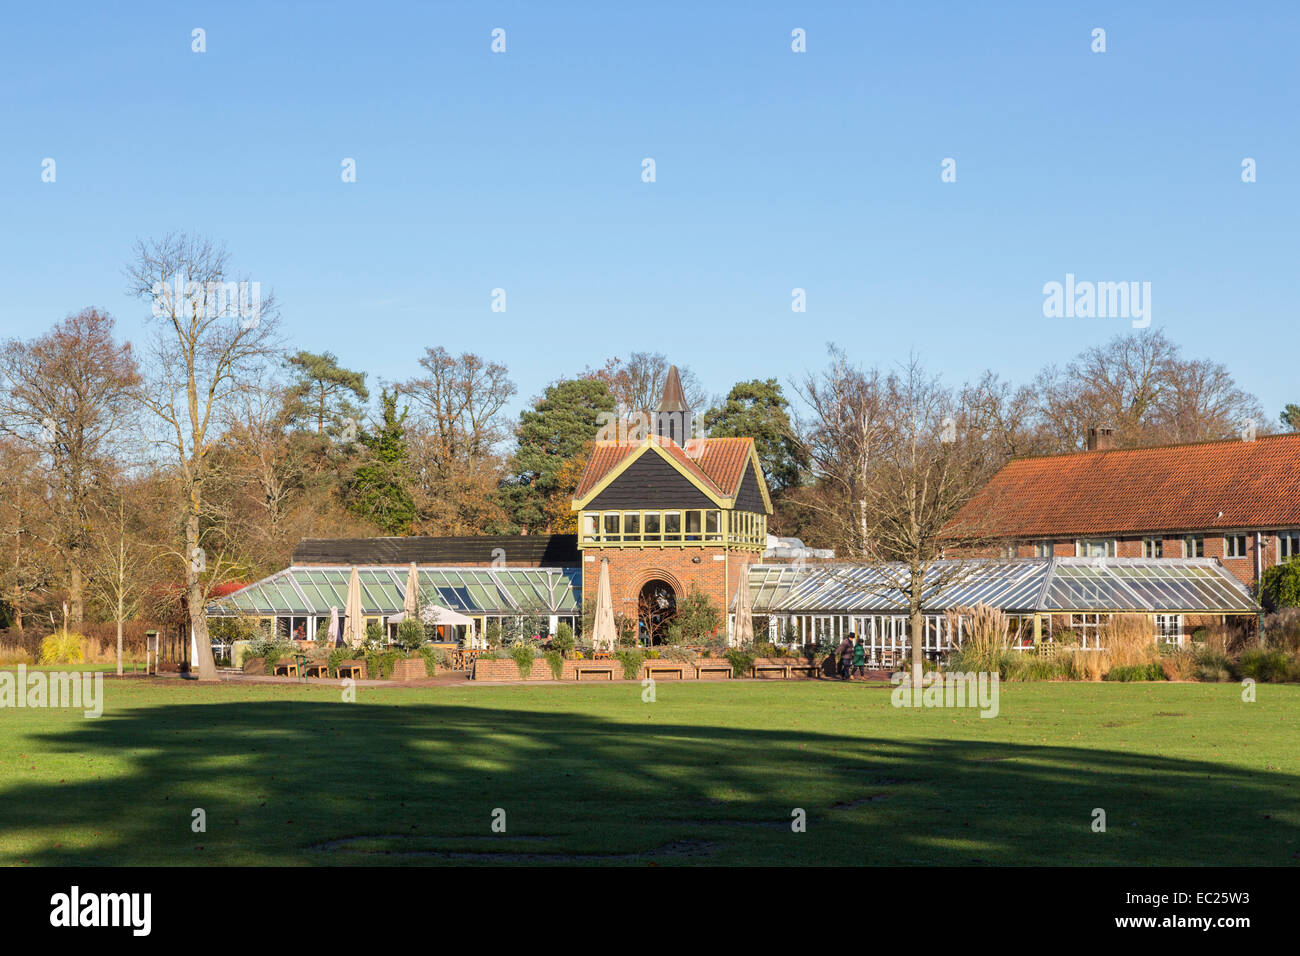 The restaurant / cafe / tea rooms at the Royal Horticultural Society botanical gardens at Wisley, Surrey, UK, on a sunny day in winter Stock Photo